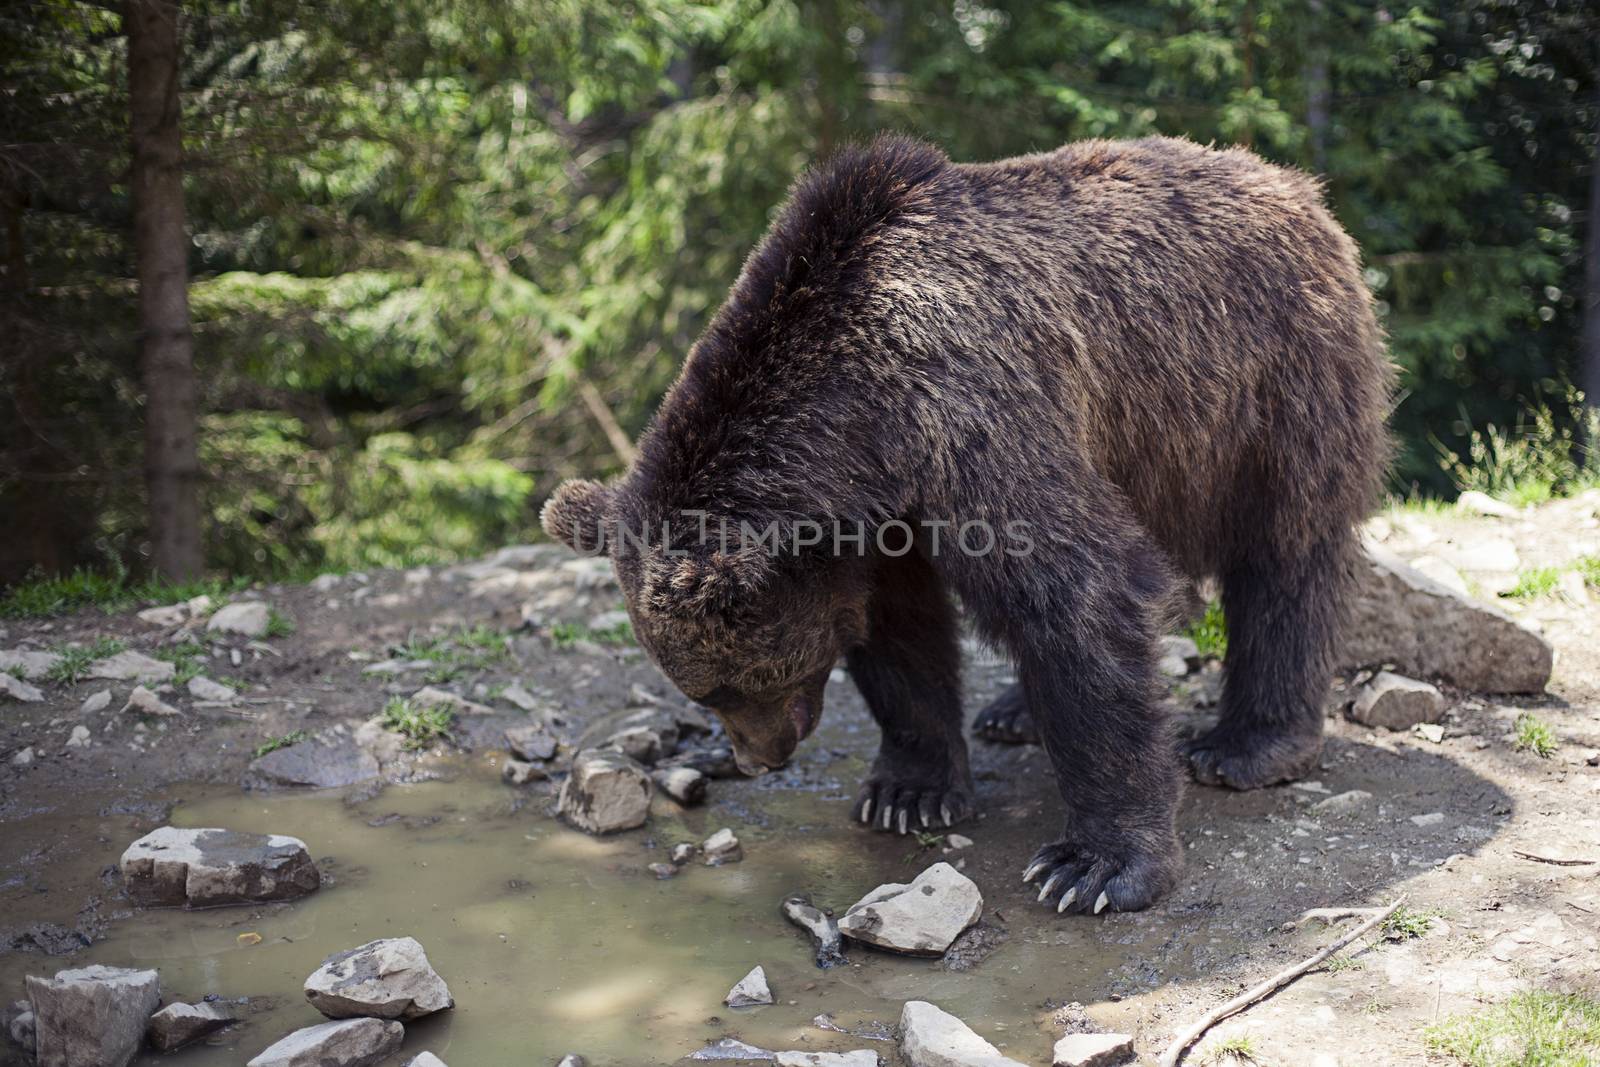 Close up of a wild big male brown bear in colorful green rocky terrain swamp carefully watching surroundings